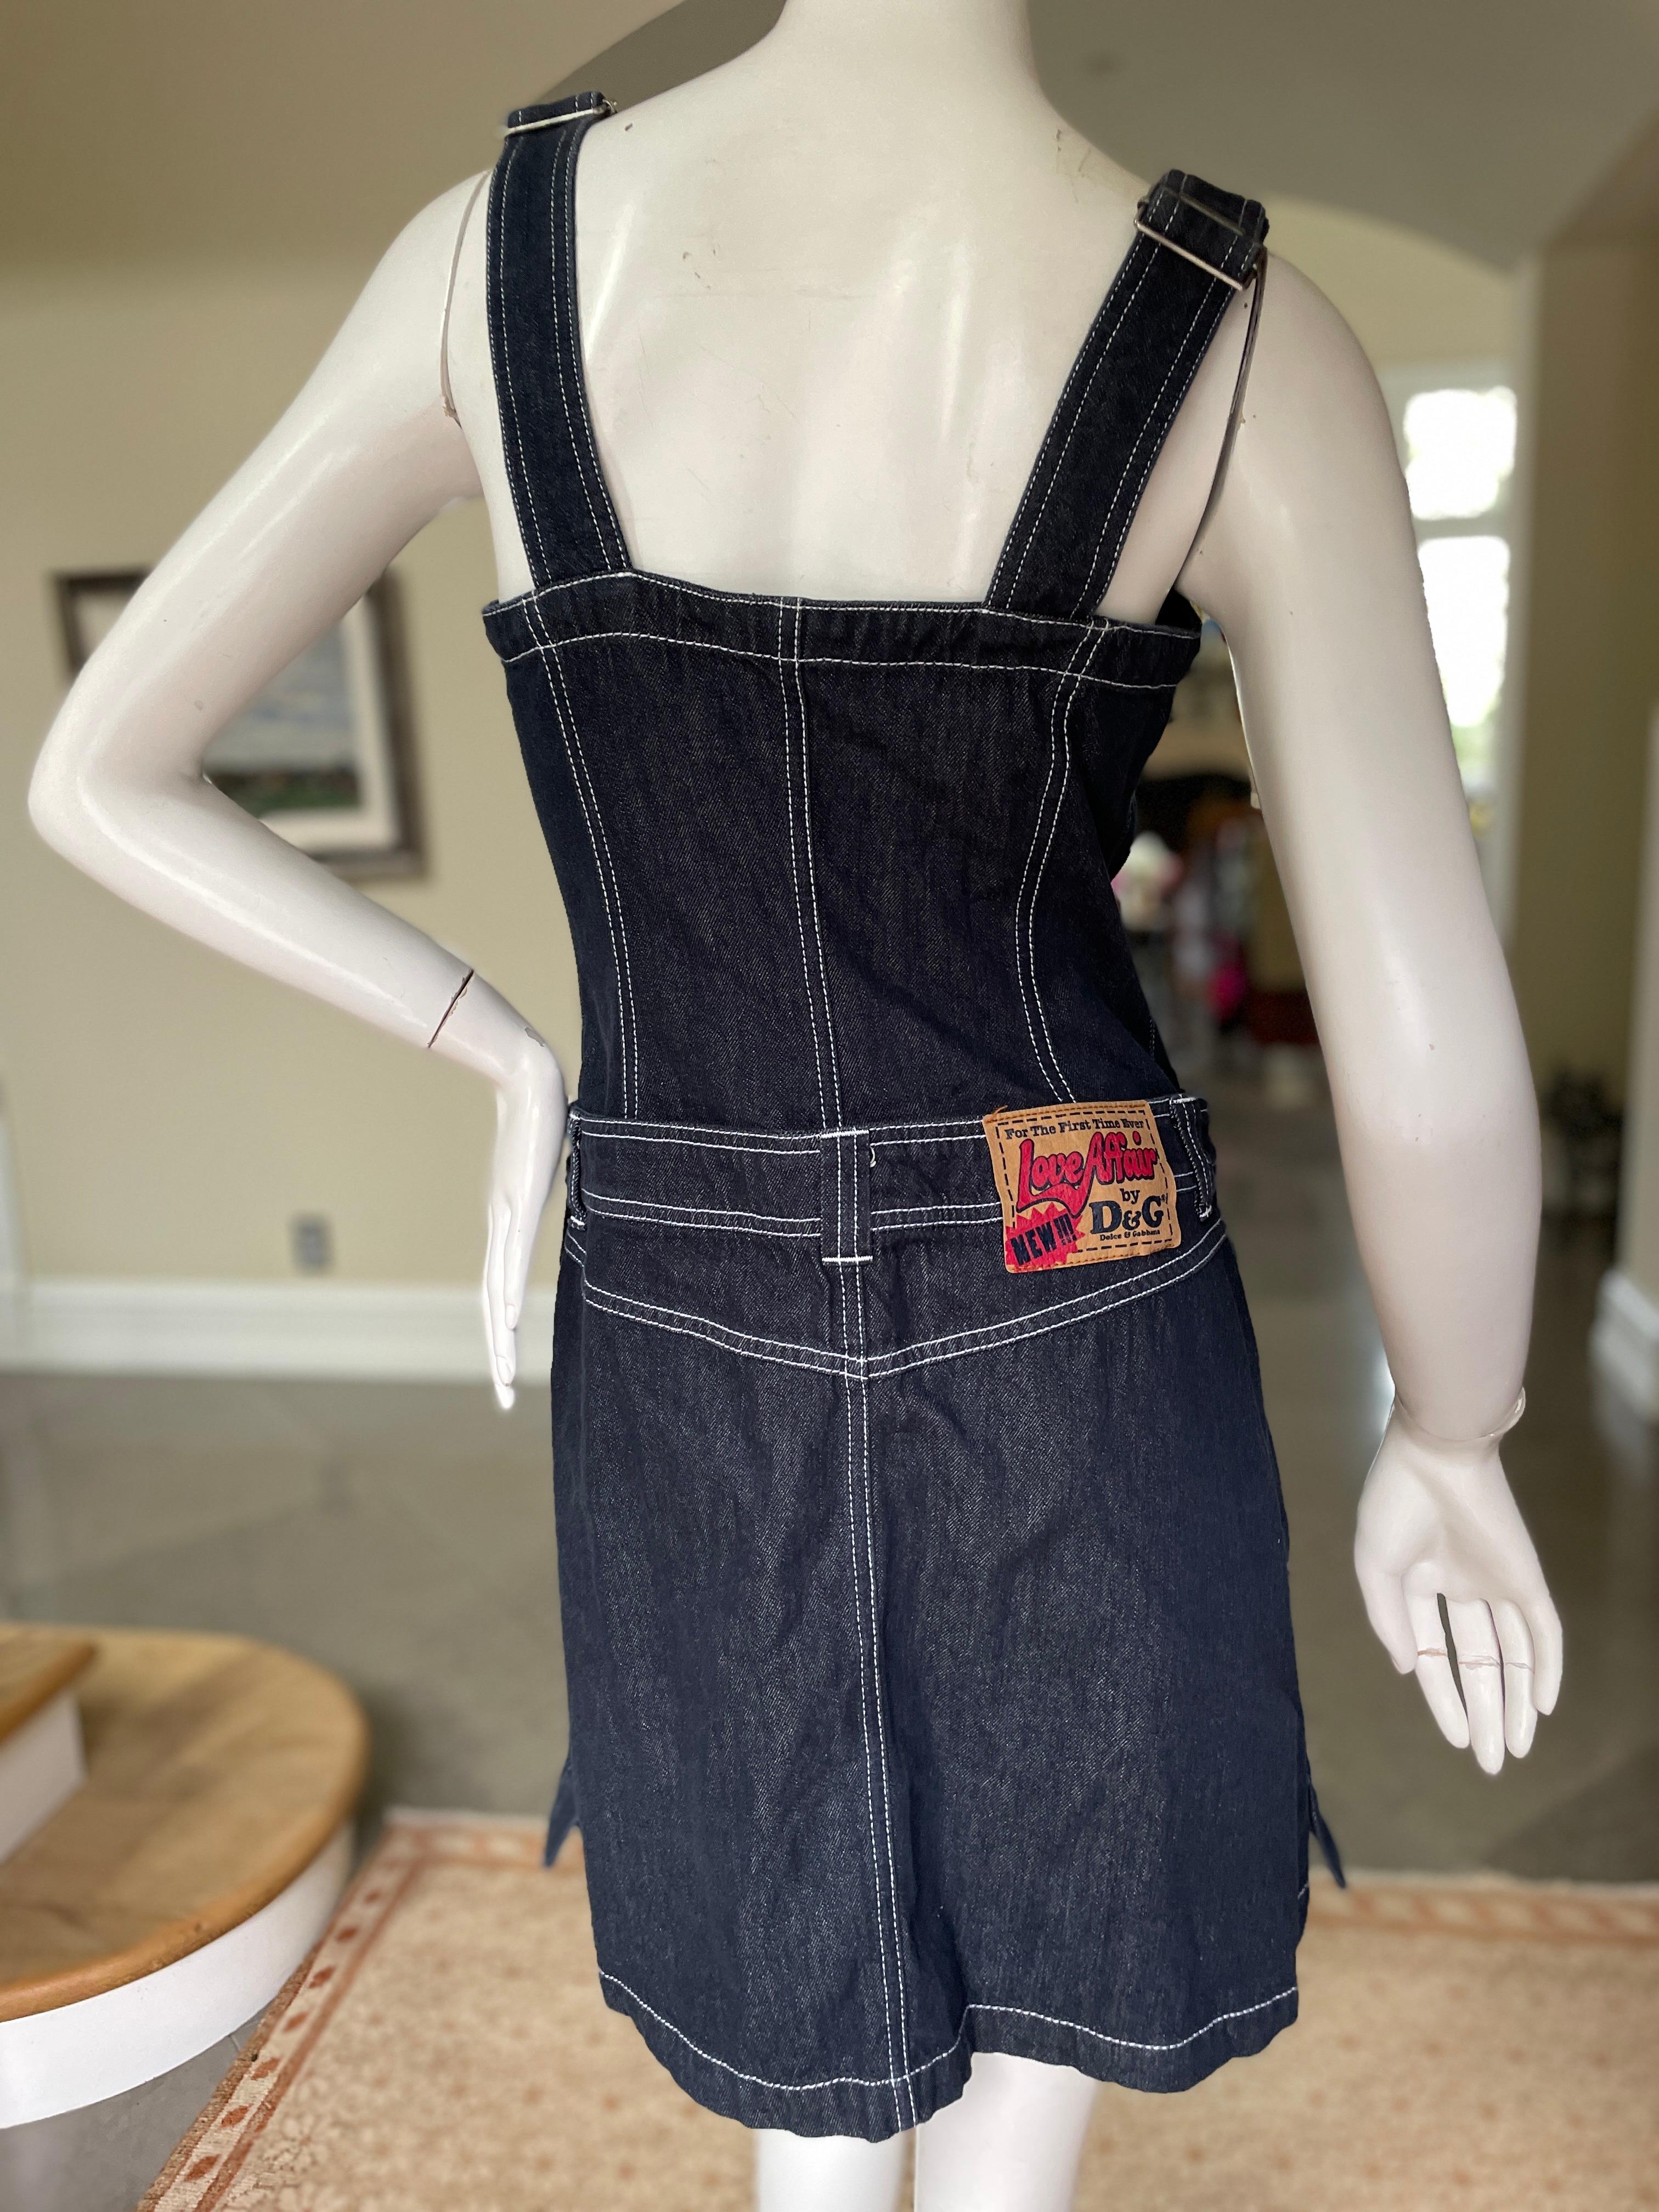 D&G by Dolce & Gabbana Vintage Overall Style Denim Blue Jean Dress In Excellent Condition For Sale In Cloverdale, CA